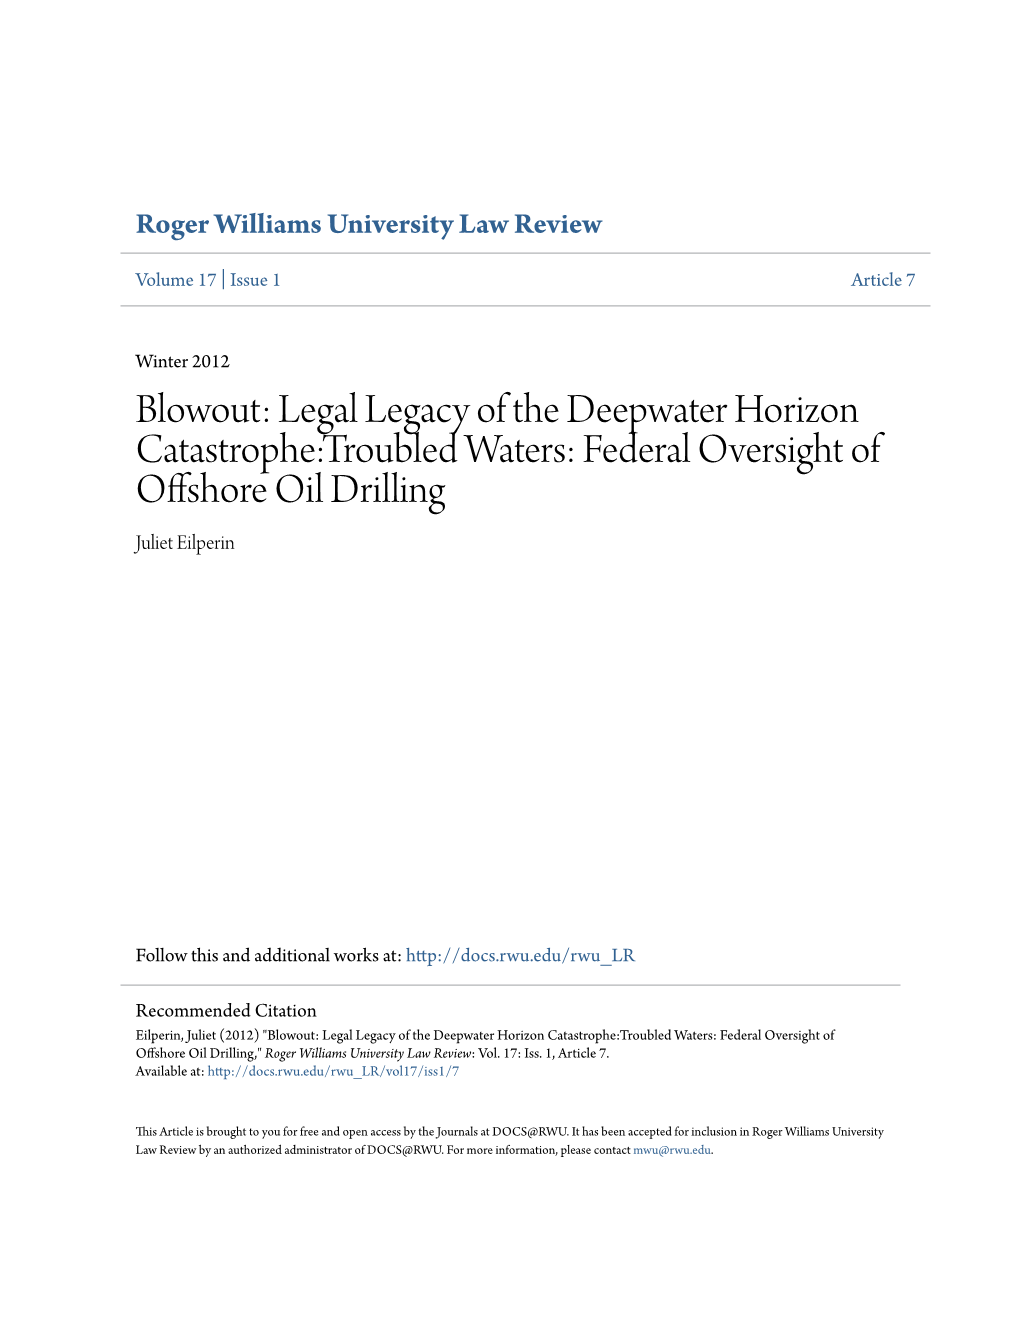 Federal Oversight of Offshore Oil Drilling Juliet Eilperin